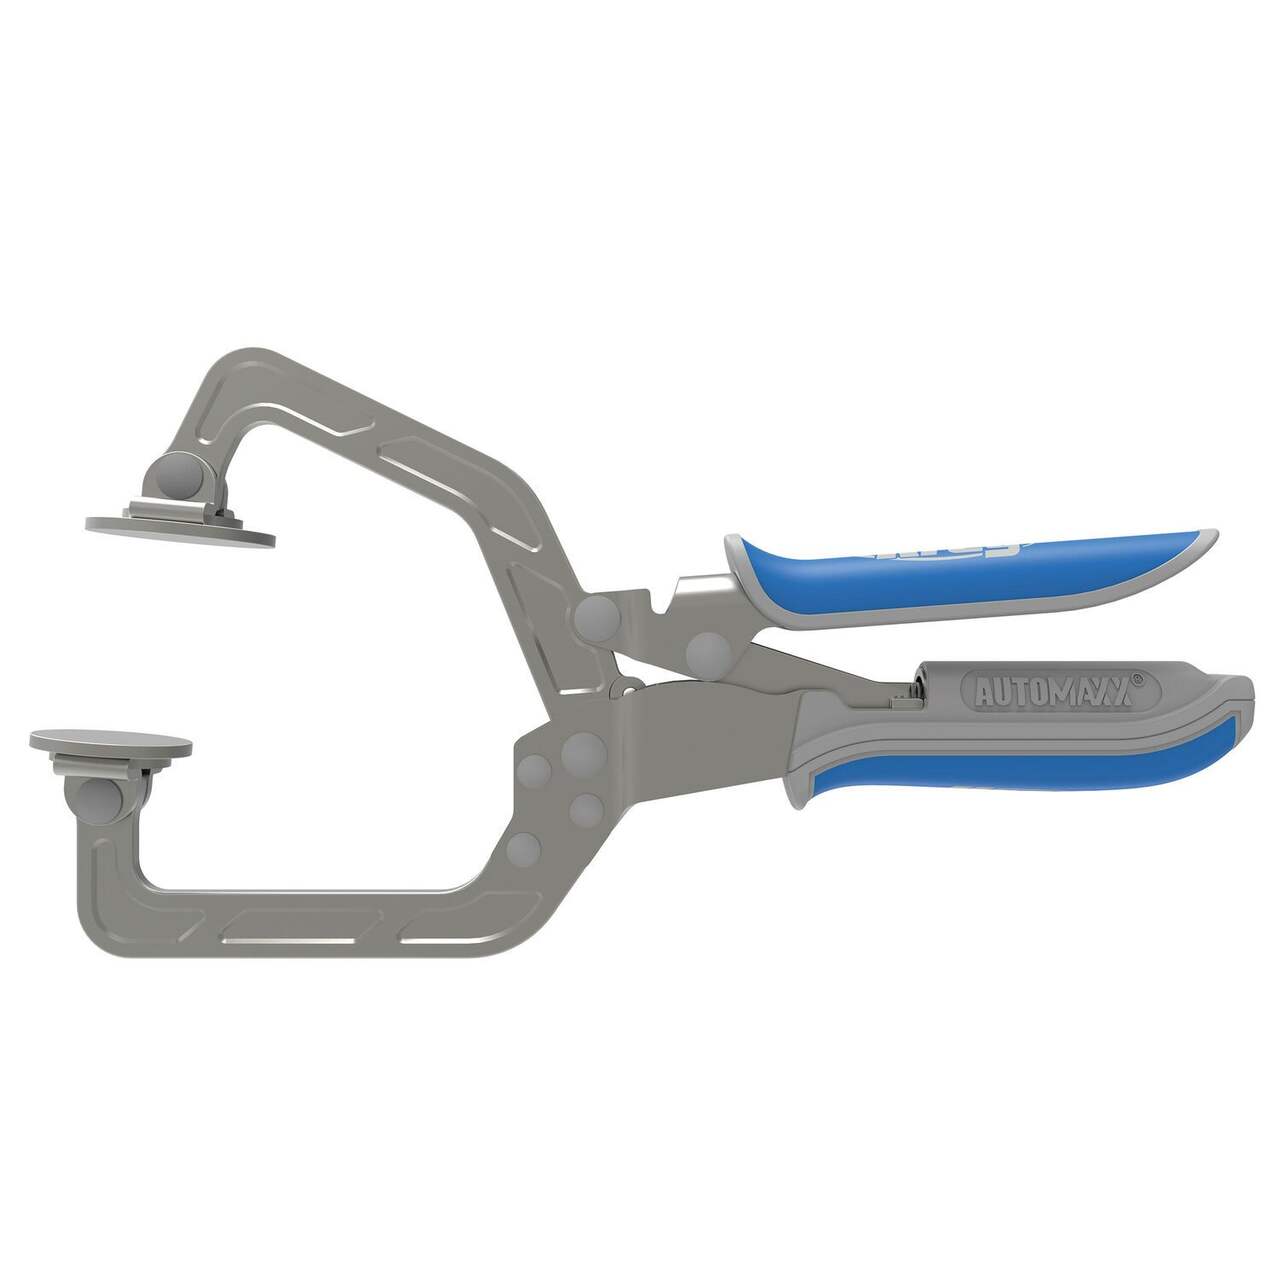 https://media-www.canadiantire.ca/product/fixing/tools/metal-working/0581876/kreg-wood-project-clamp-3-inch-ccd9d0c3-8b8b-4380-8902-4da9589f5960-jpgrendition.jpg?imdensity=1&imwidth=640&impolicy=mZoom